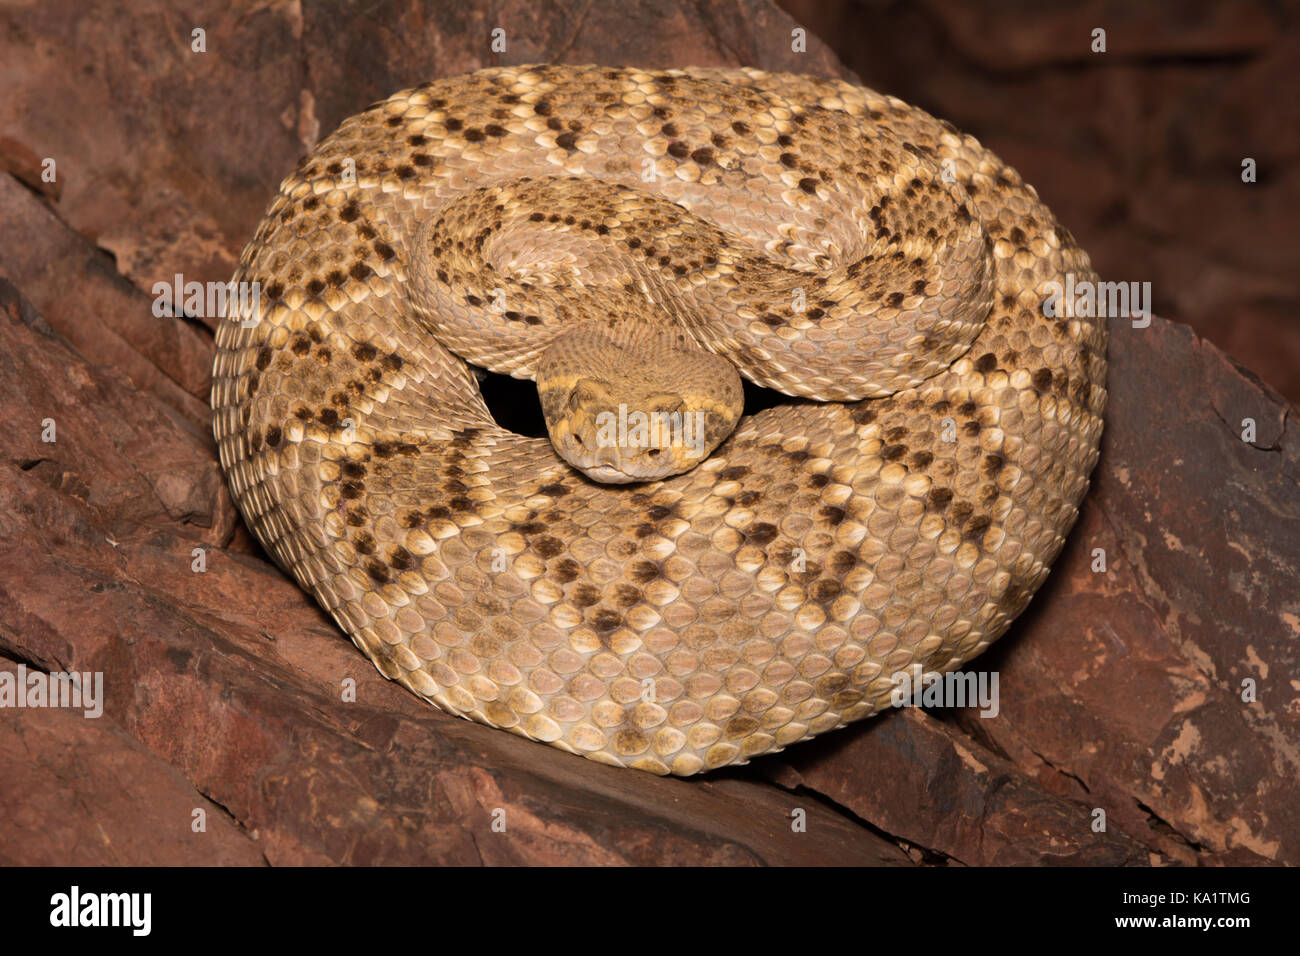 Western Diamond-backed Rattlesnake (Crotalus atrox) from Sonora, Mexico. Stock Photo